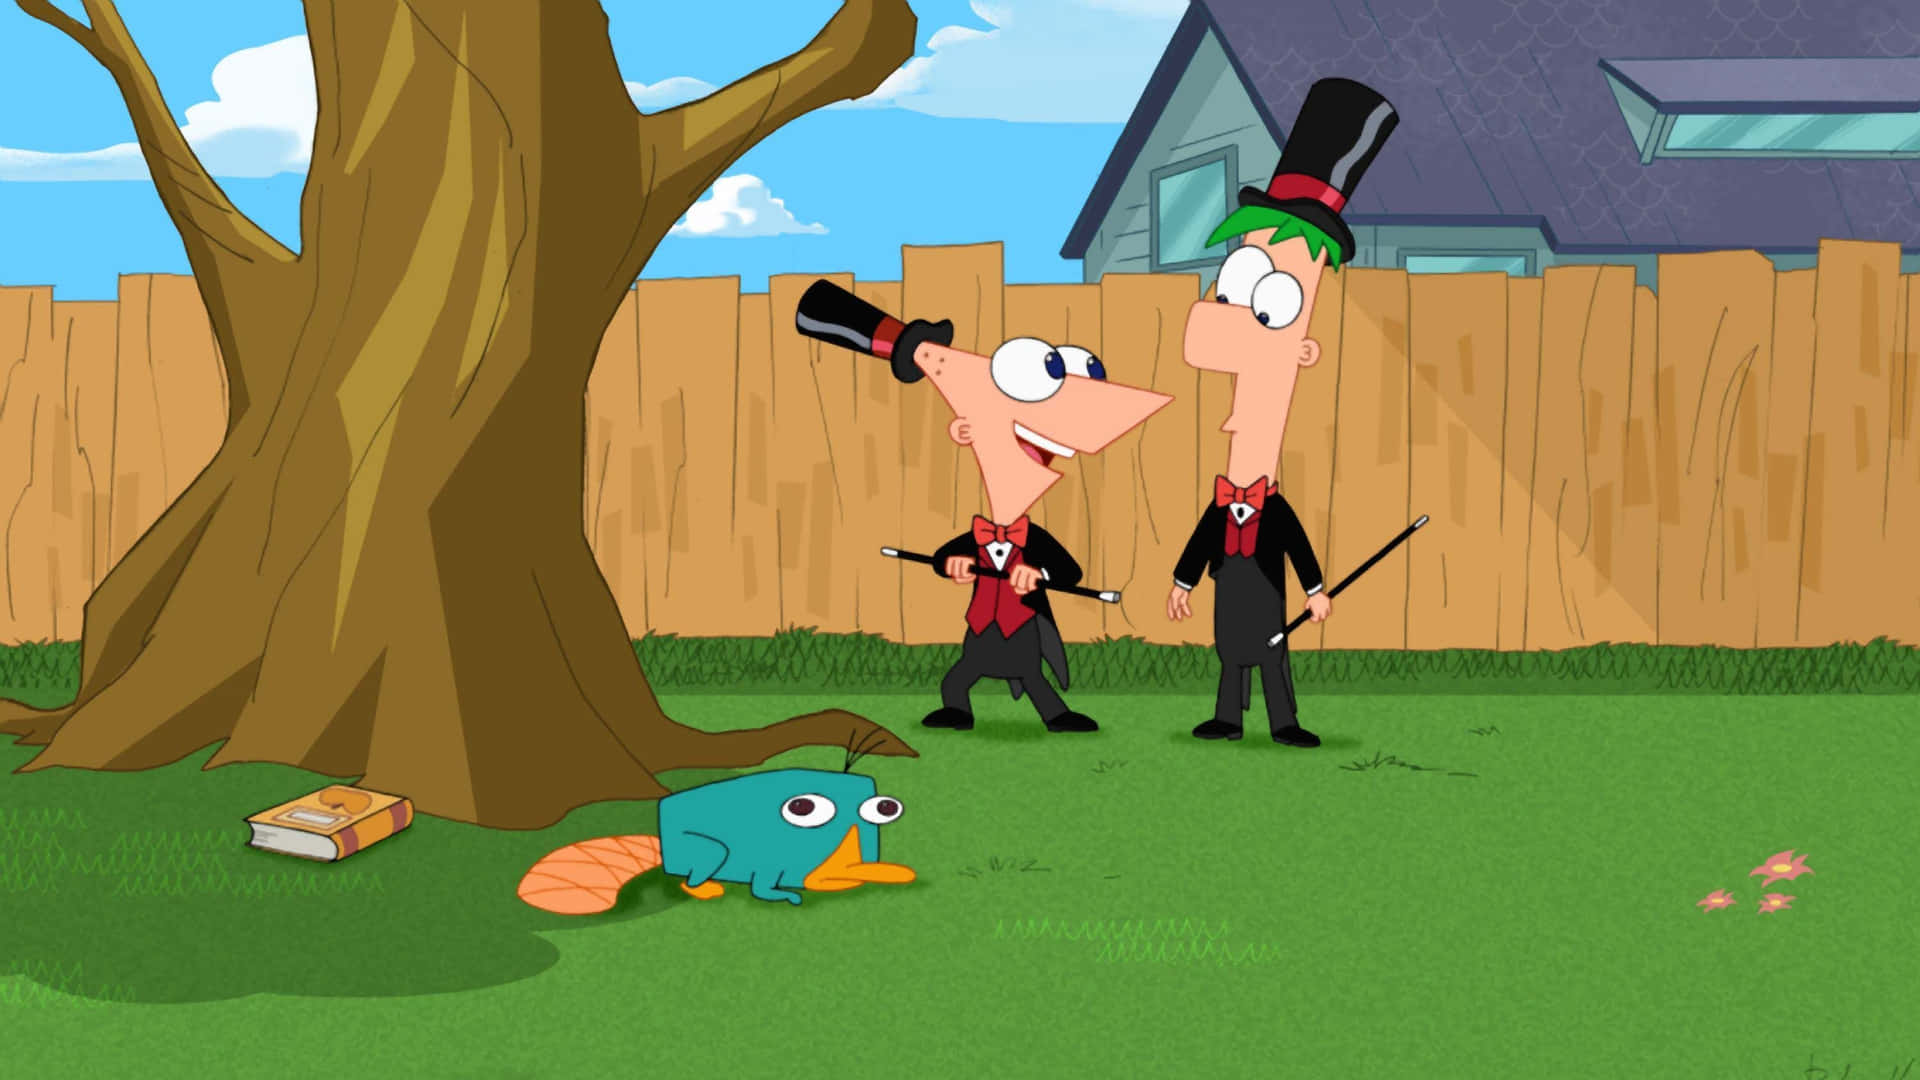 Phineas and Ferb enjoying a sunny day outdoors with friends